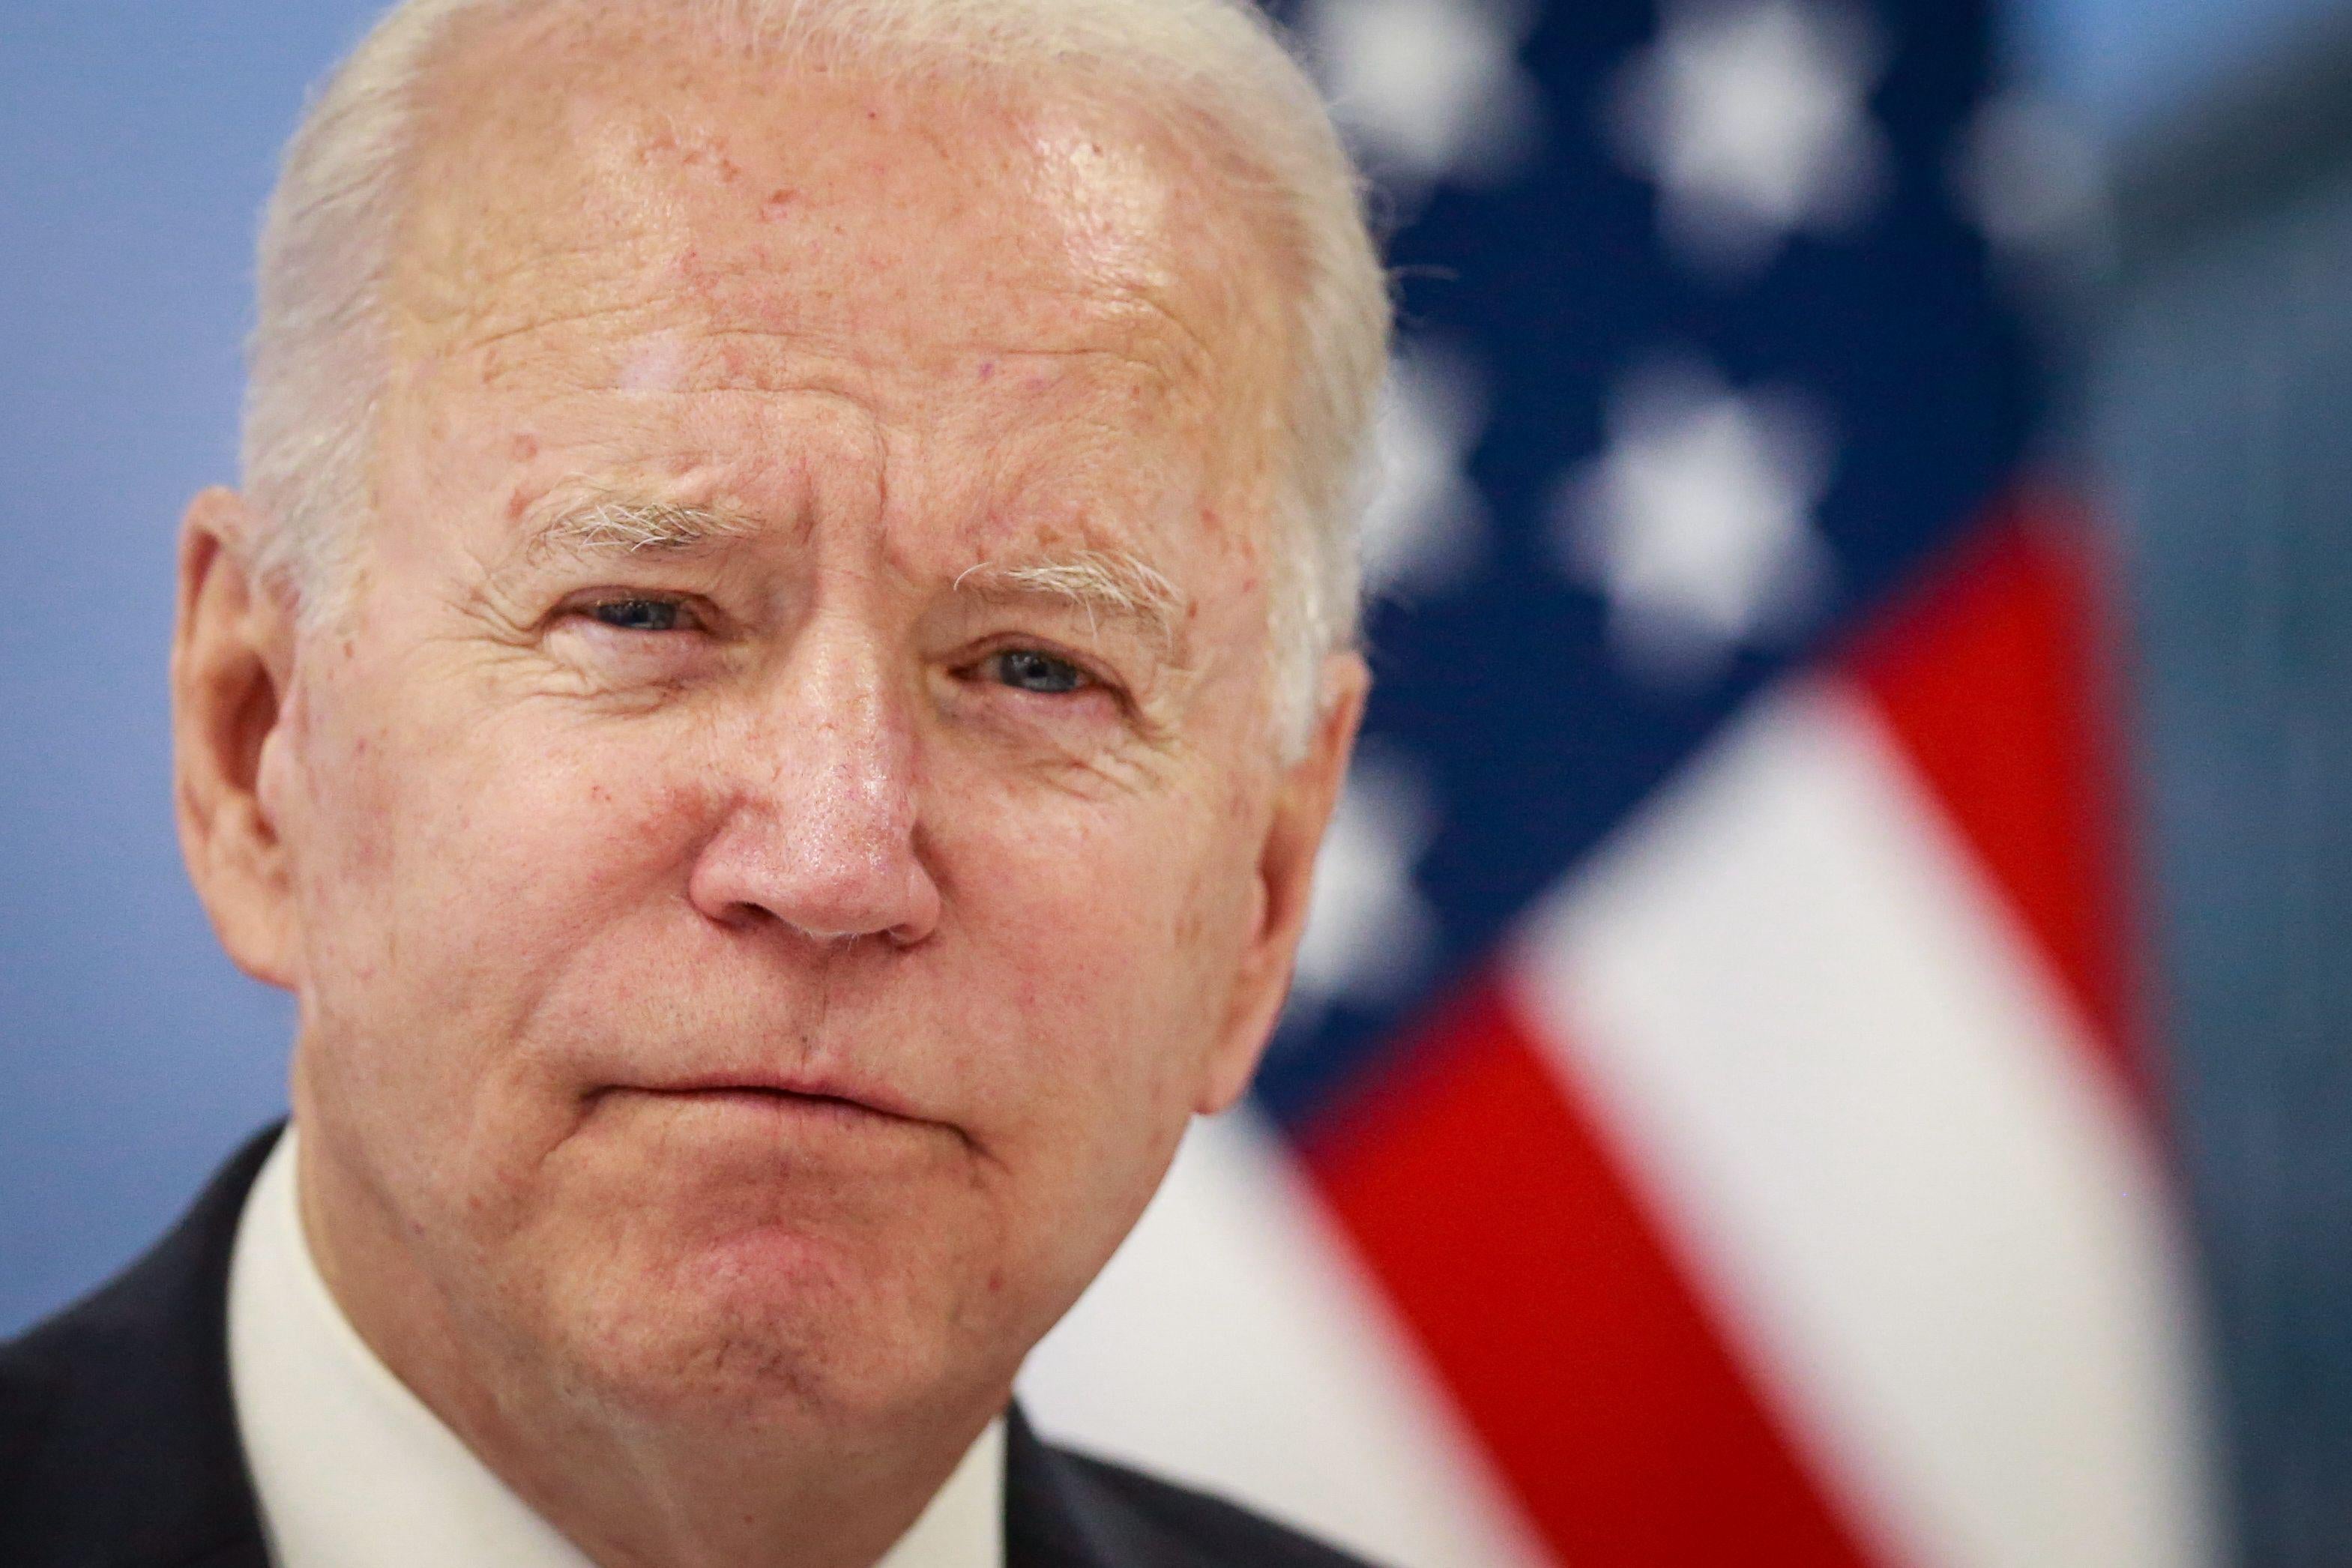 A close-up of Biden's face, looking grave.